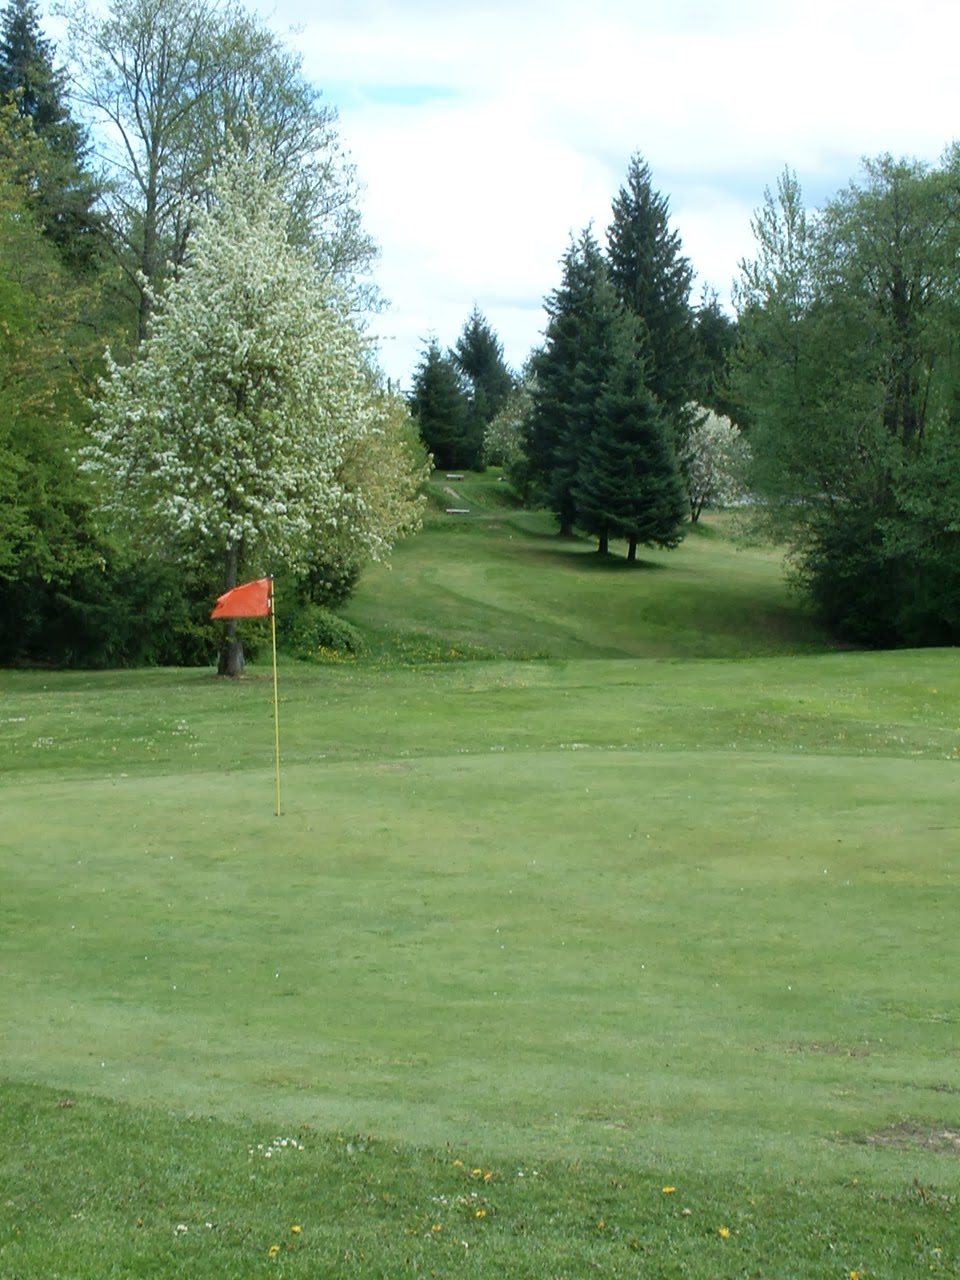 Eaglequest Golf Center | point of interest | 1601 Thatcher Rd, Nanaimo, BC V9R 1S6, Canada | 2507541325 OR +1 250-754-1325